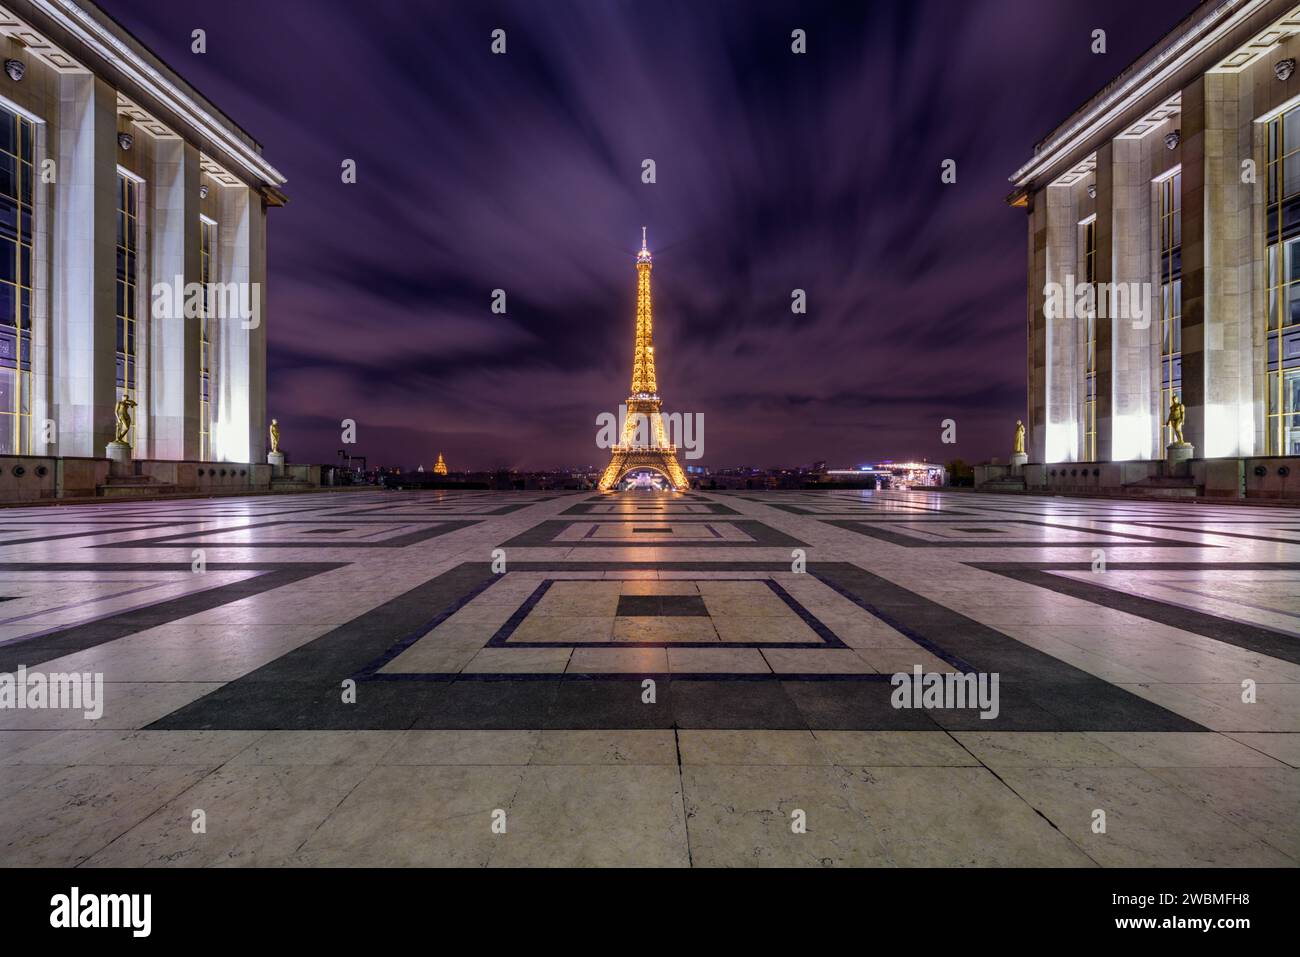 Place du Trocadéro at night with the Eiffel Tower in the background illuminated with a long exposure in Paris, France Stock Photo